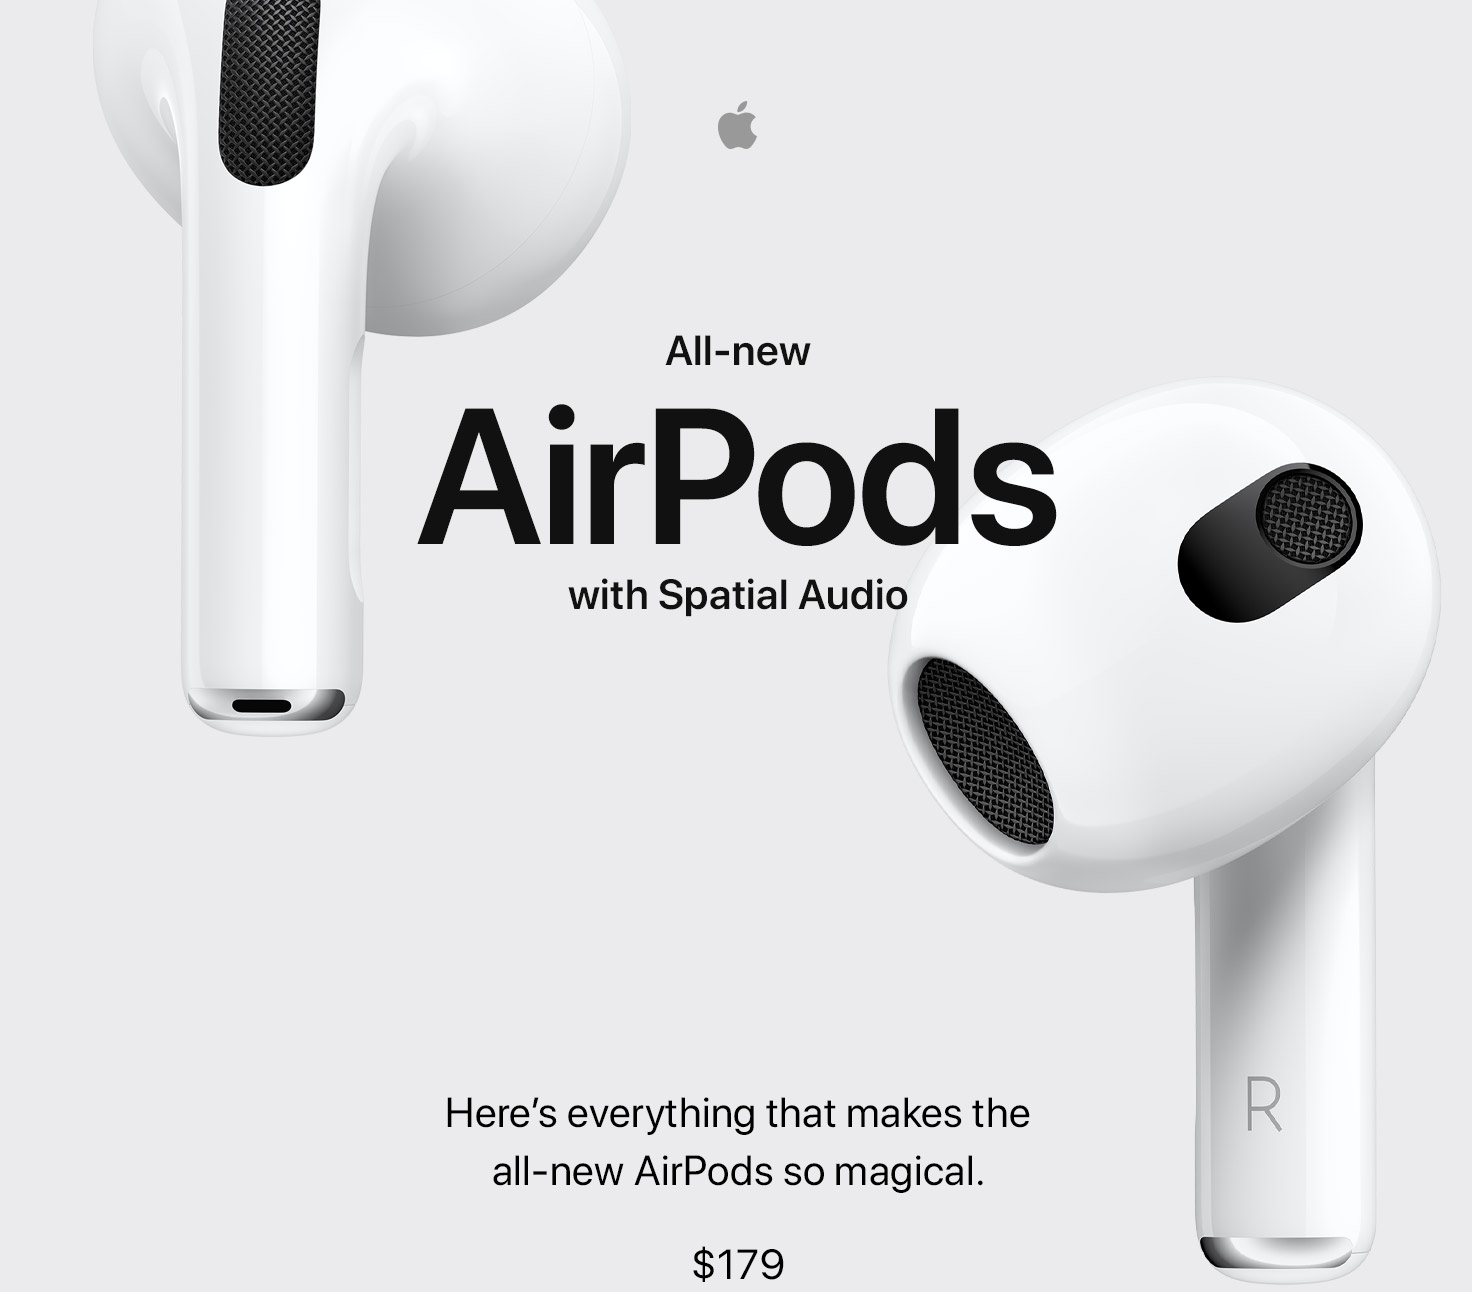 All-new AirPods with Spatial Audio  Here's everything that makes the all-new AirPods so magical.  $179